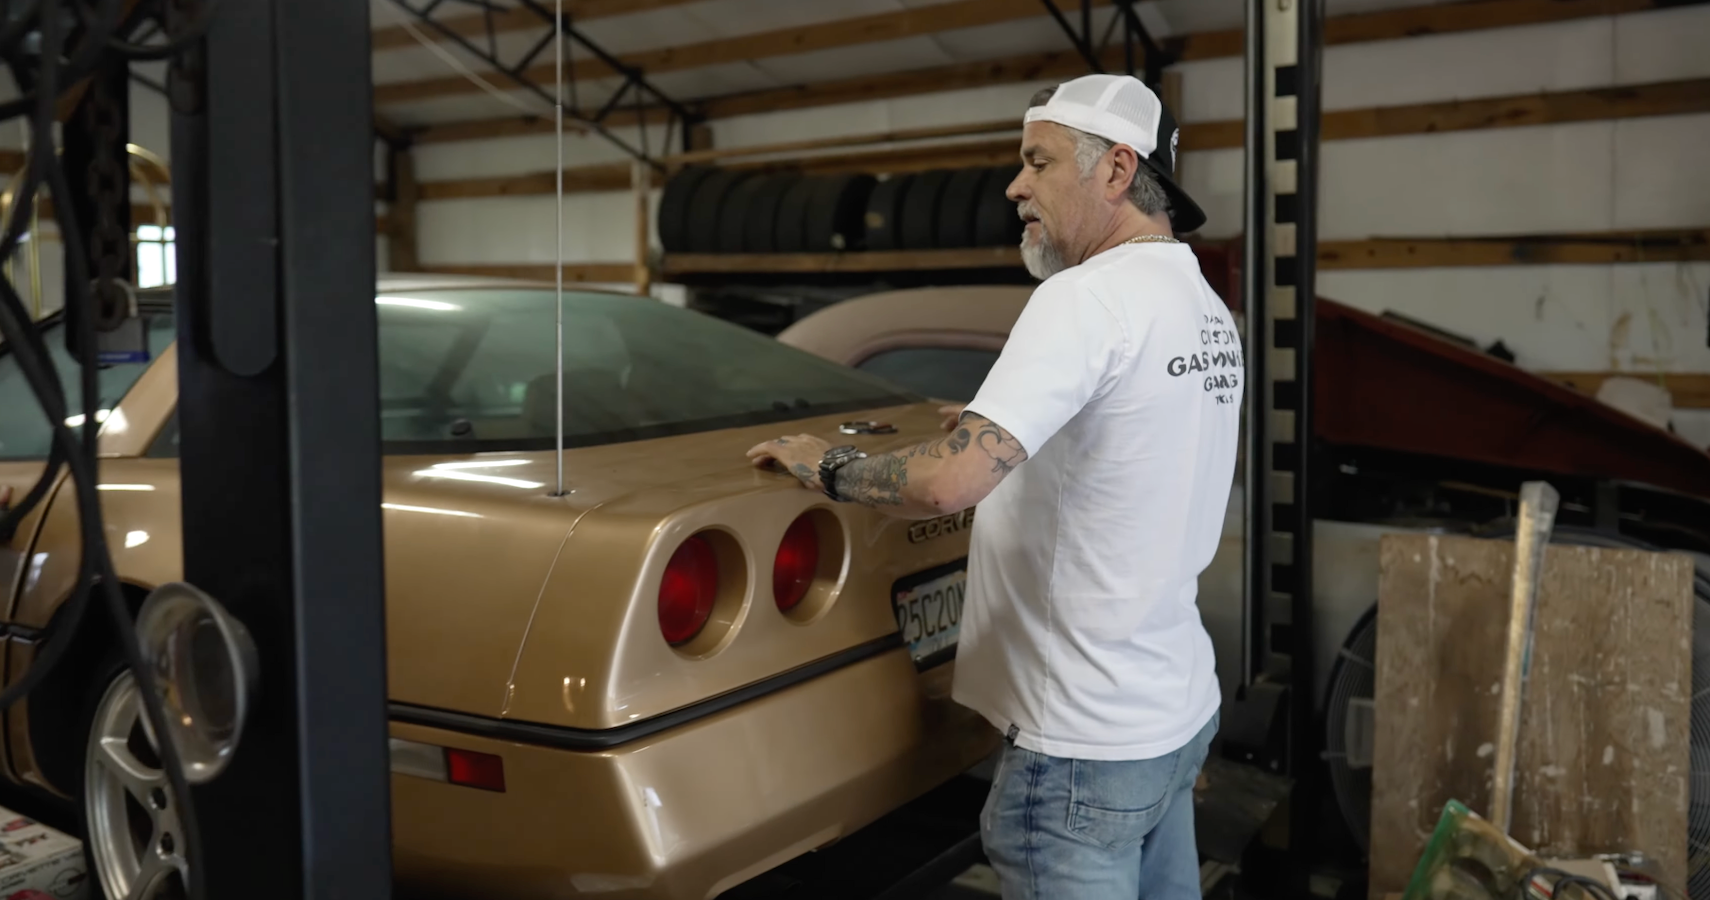 Check Out The Small Classic Car Collection Richard Rawlings Scored In Alabama